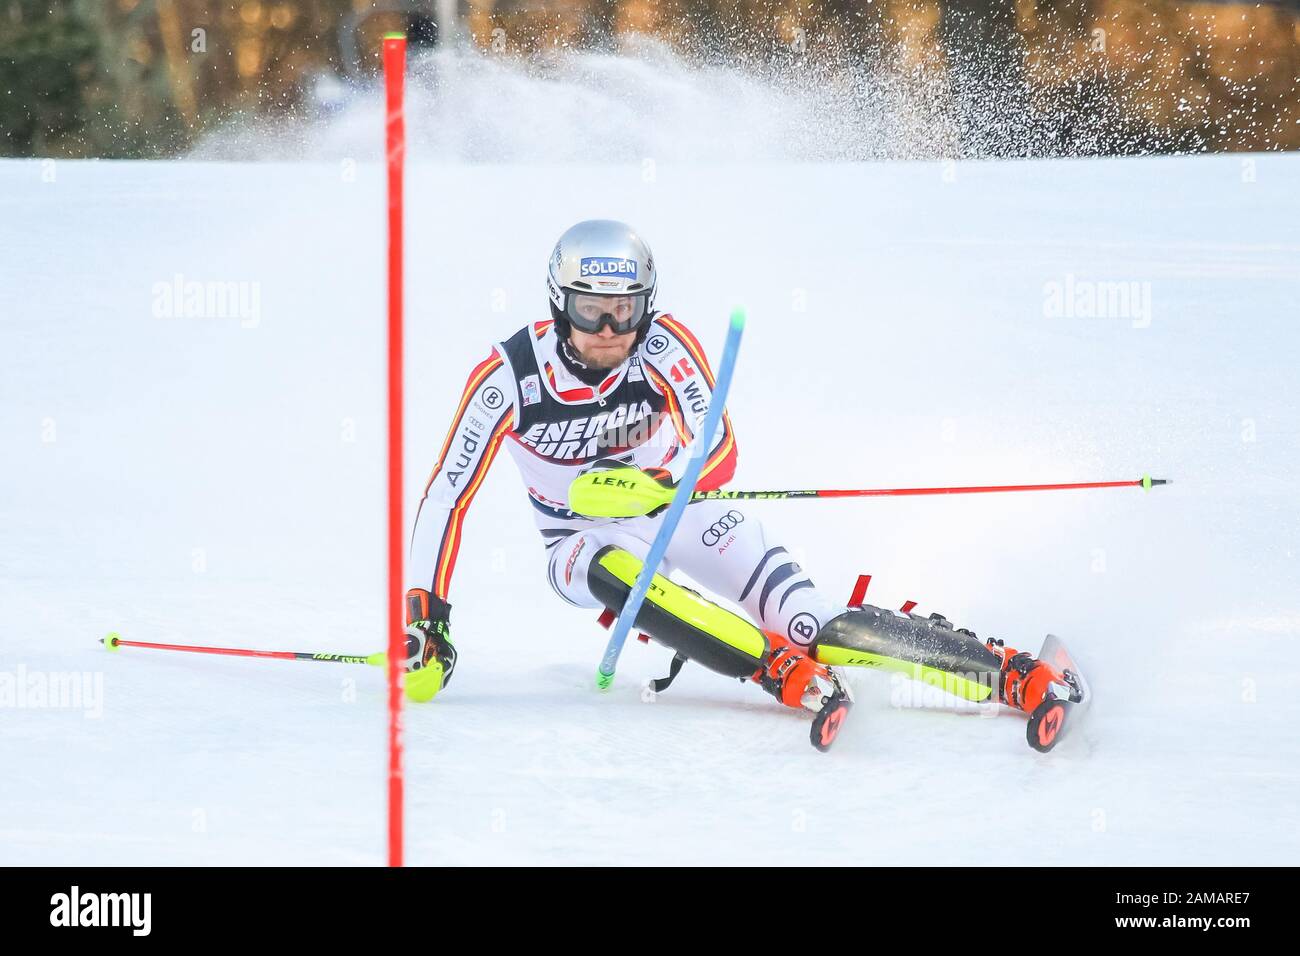 Zagreb, Croatia - January 5, 2020 : David Ketterer from Germany competing during the Audi FIS Alpine Ski World Cup 2019/2020, 3rd Mens Slalom, Snow Qu Stock Photo